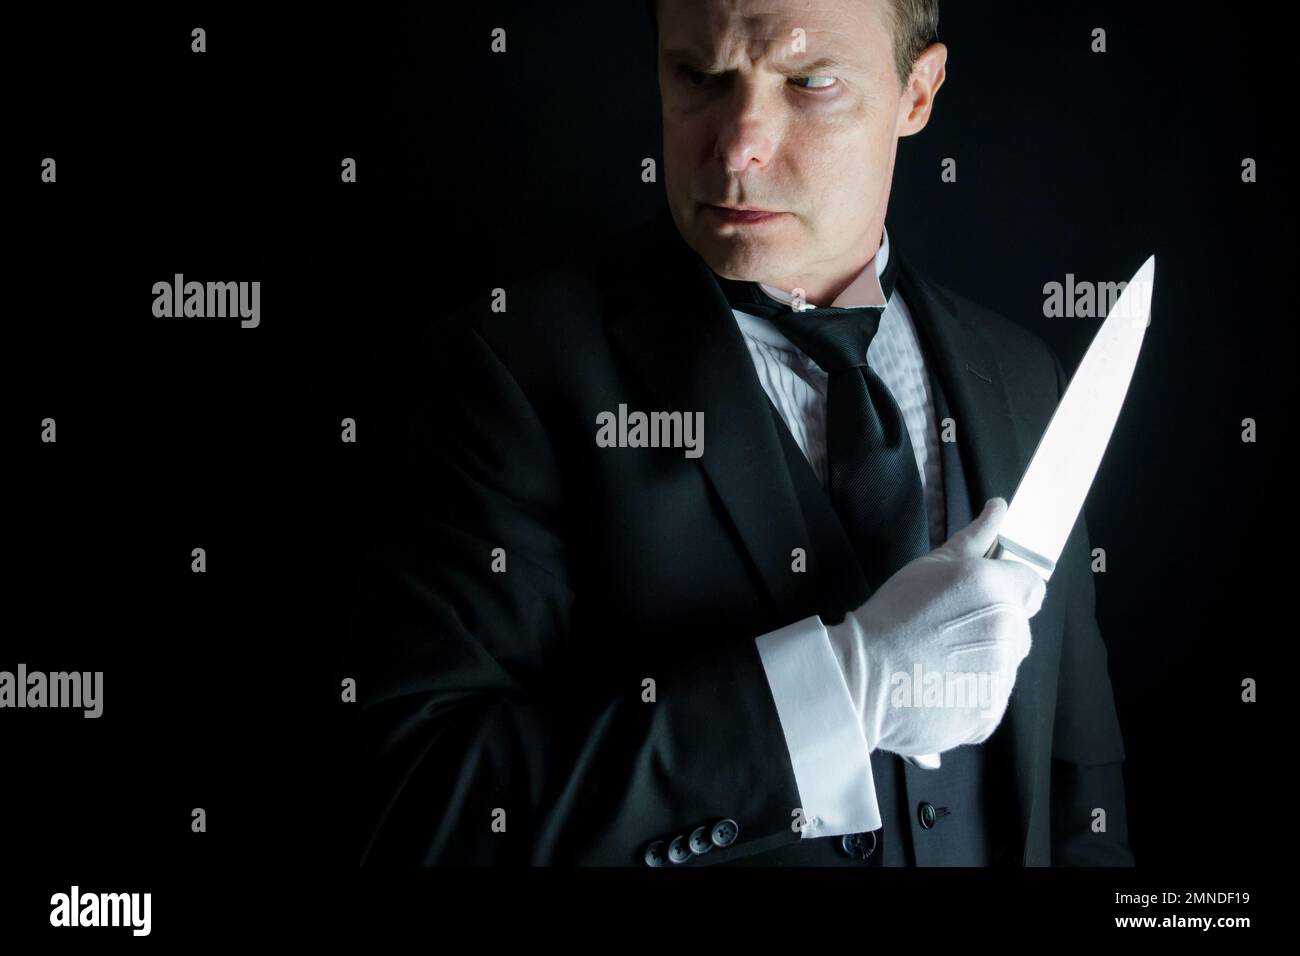 Butler in Dark Formal Suit and White Gloves Holding Sharp Knife. Concept of Butler Did It. Classic Murder Mystery. Stock Photo